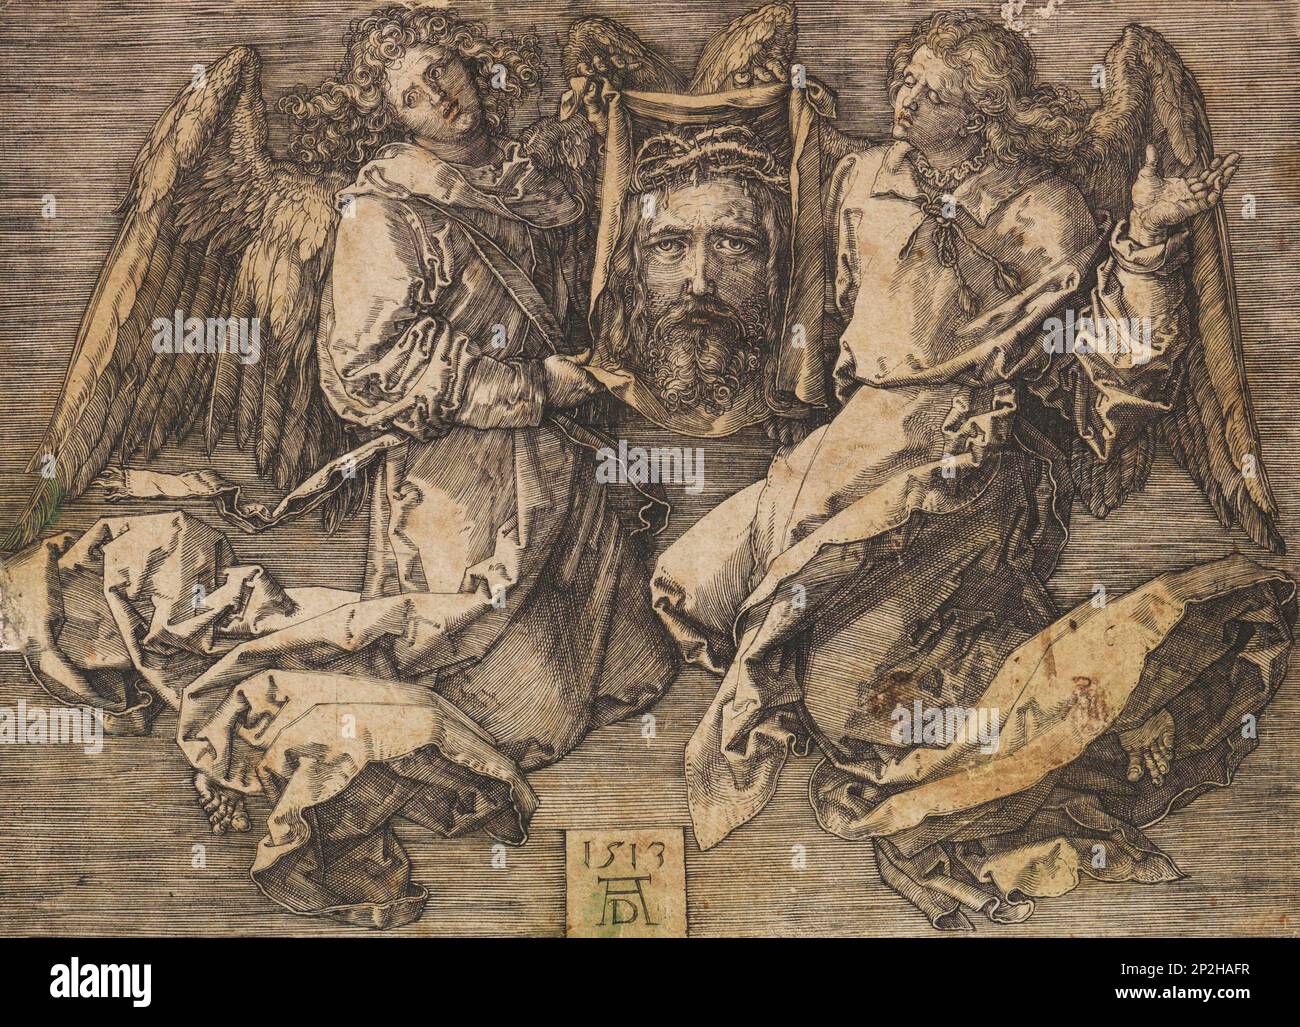 The Sudarium held by two angels, 1513. Private Collection. Stock Photo